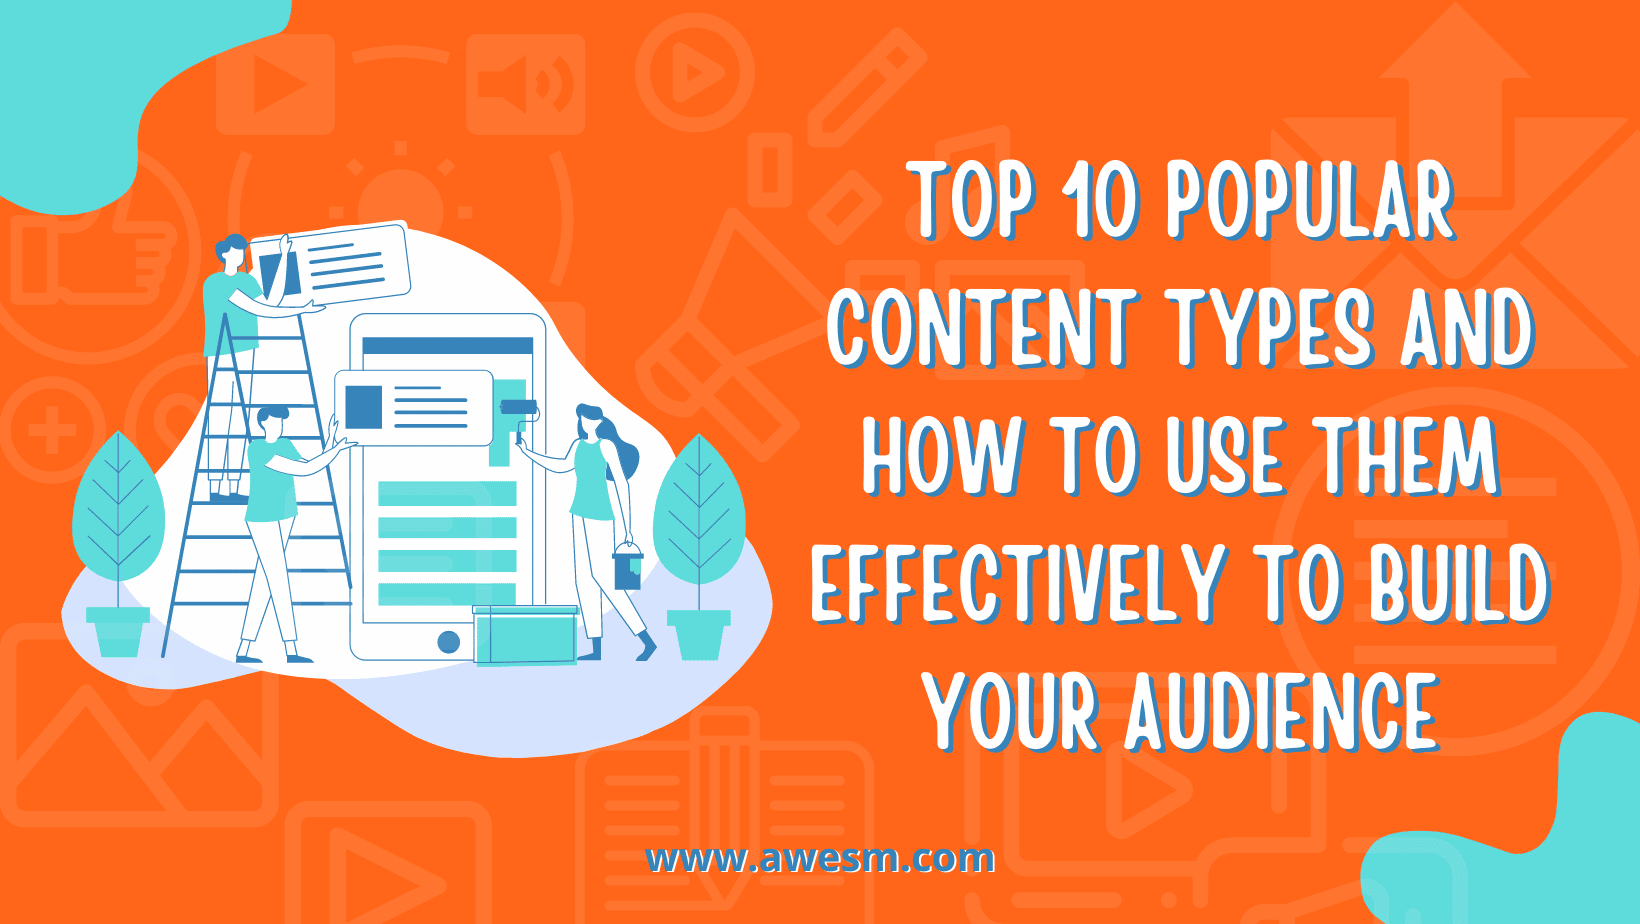 Top 10 content types